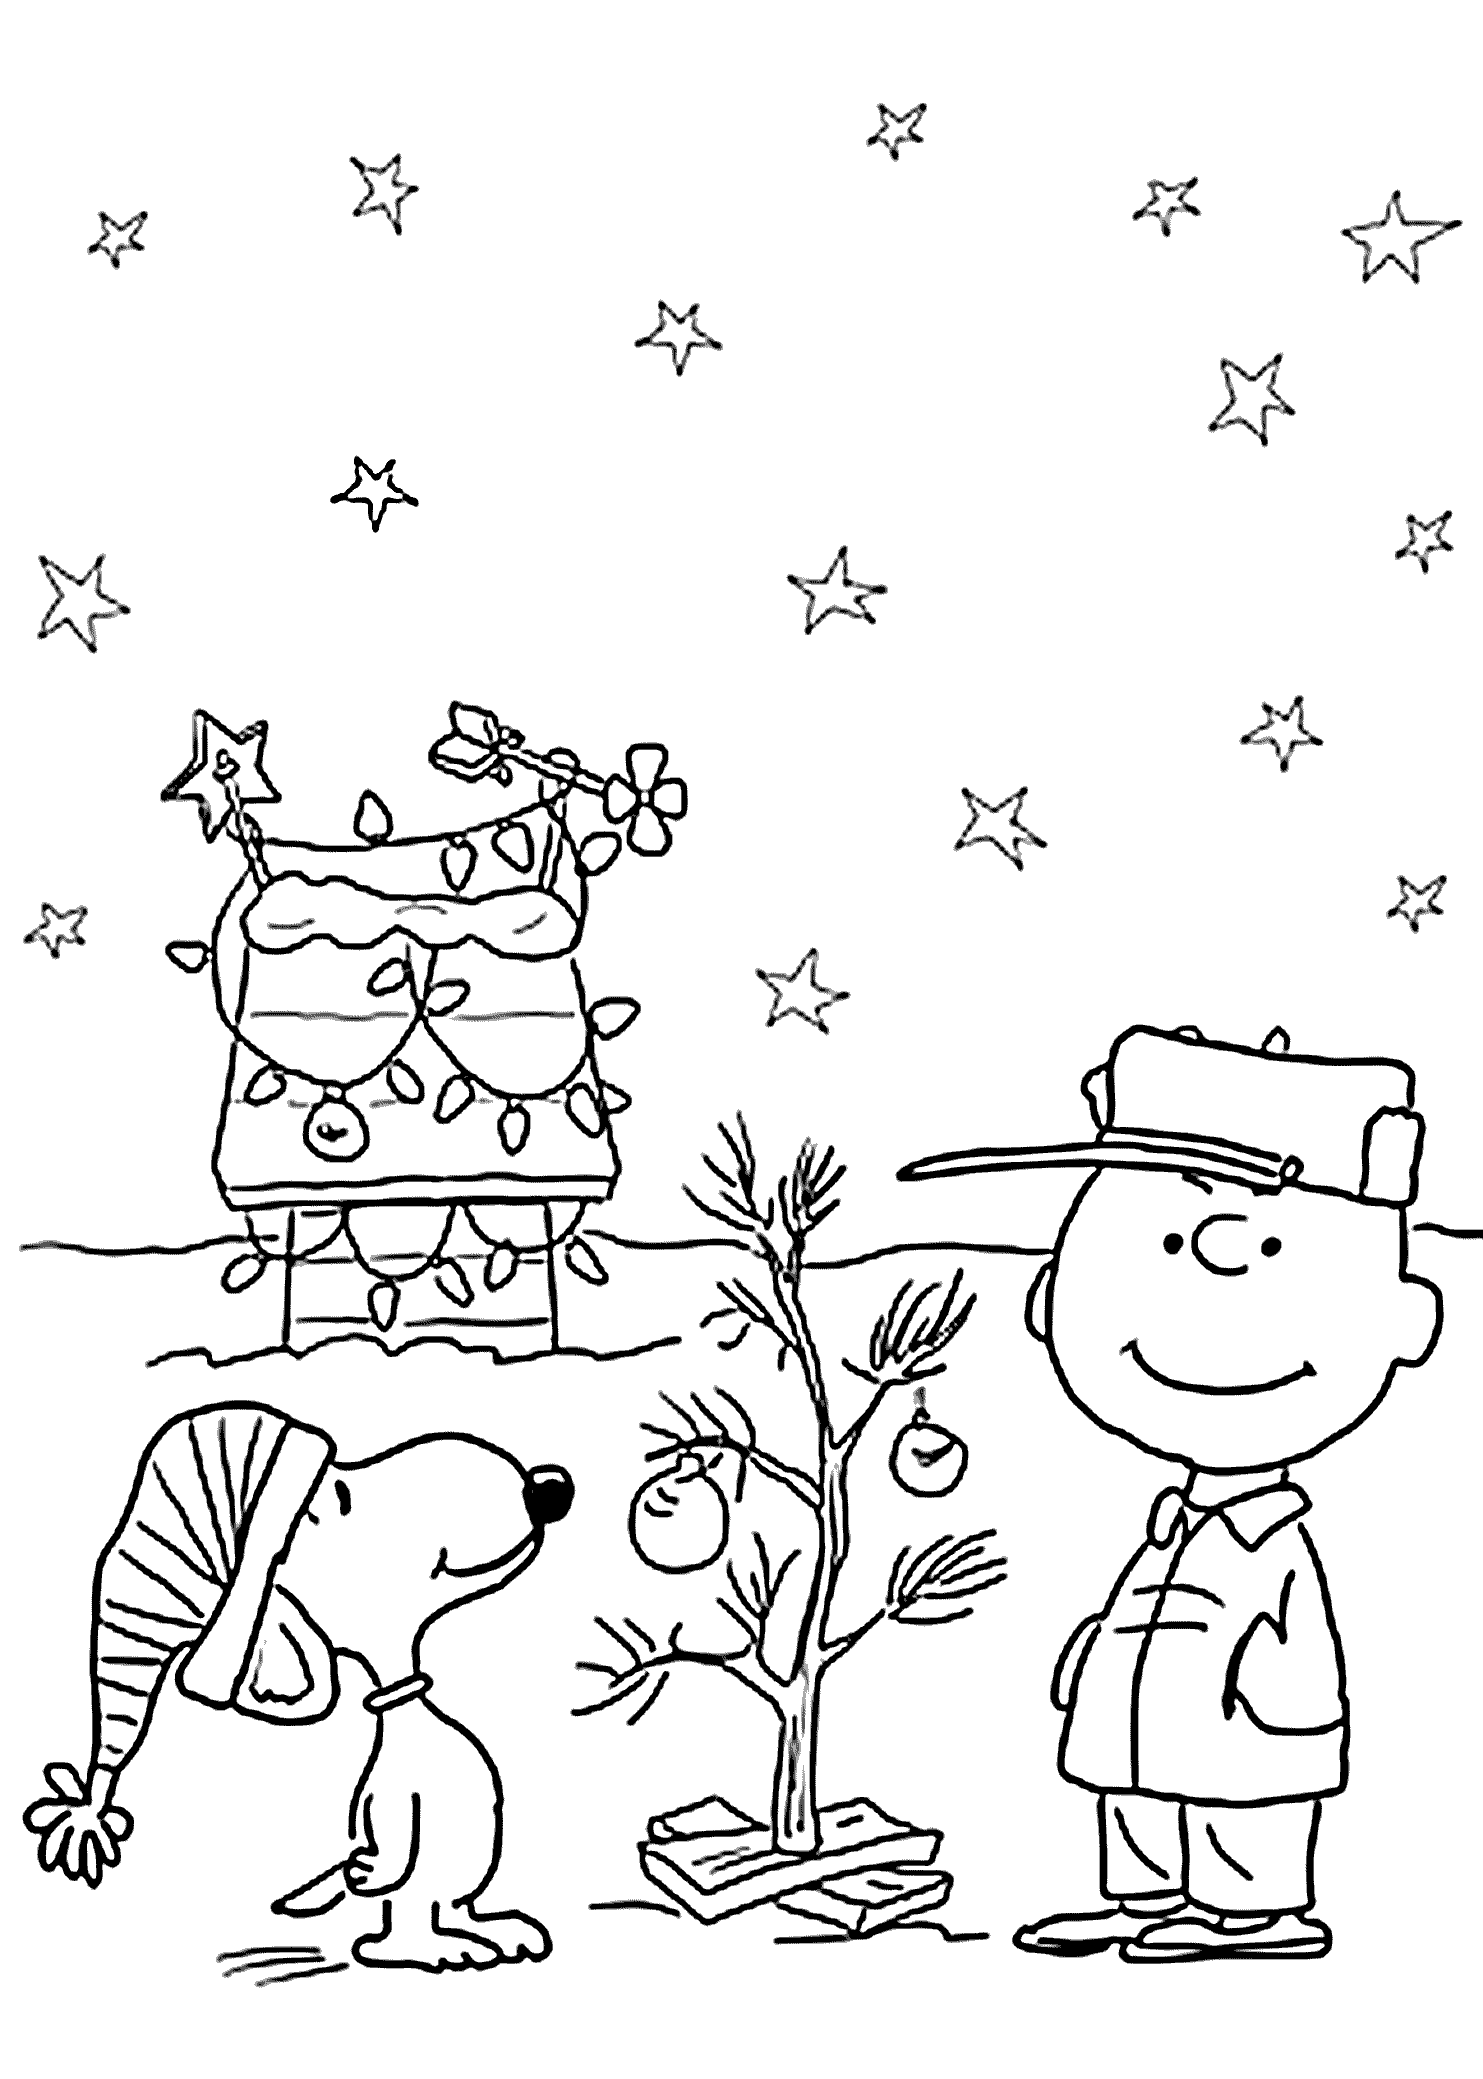 Charlie Brown Christmas Coloring Page - Coloring Pages for Kids ...